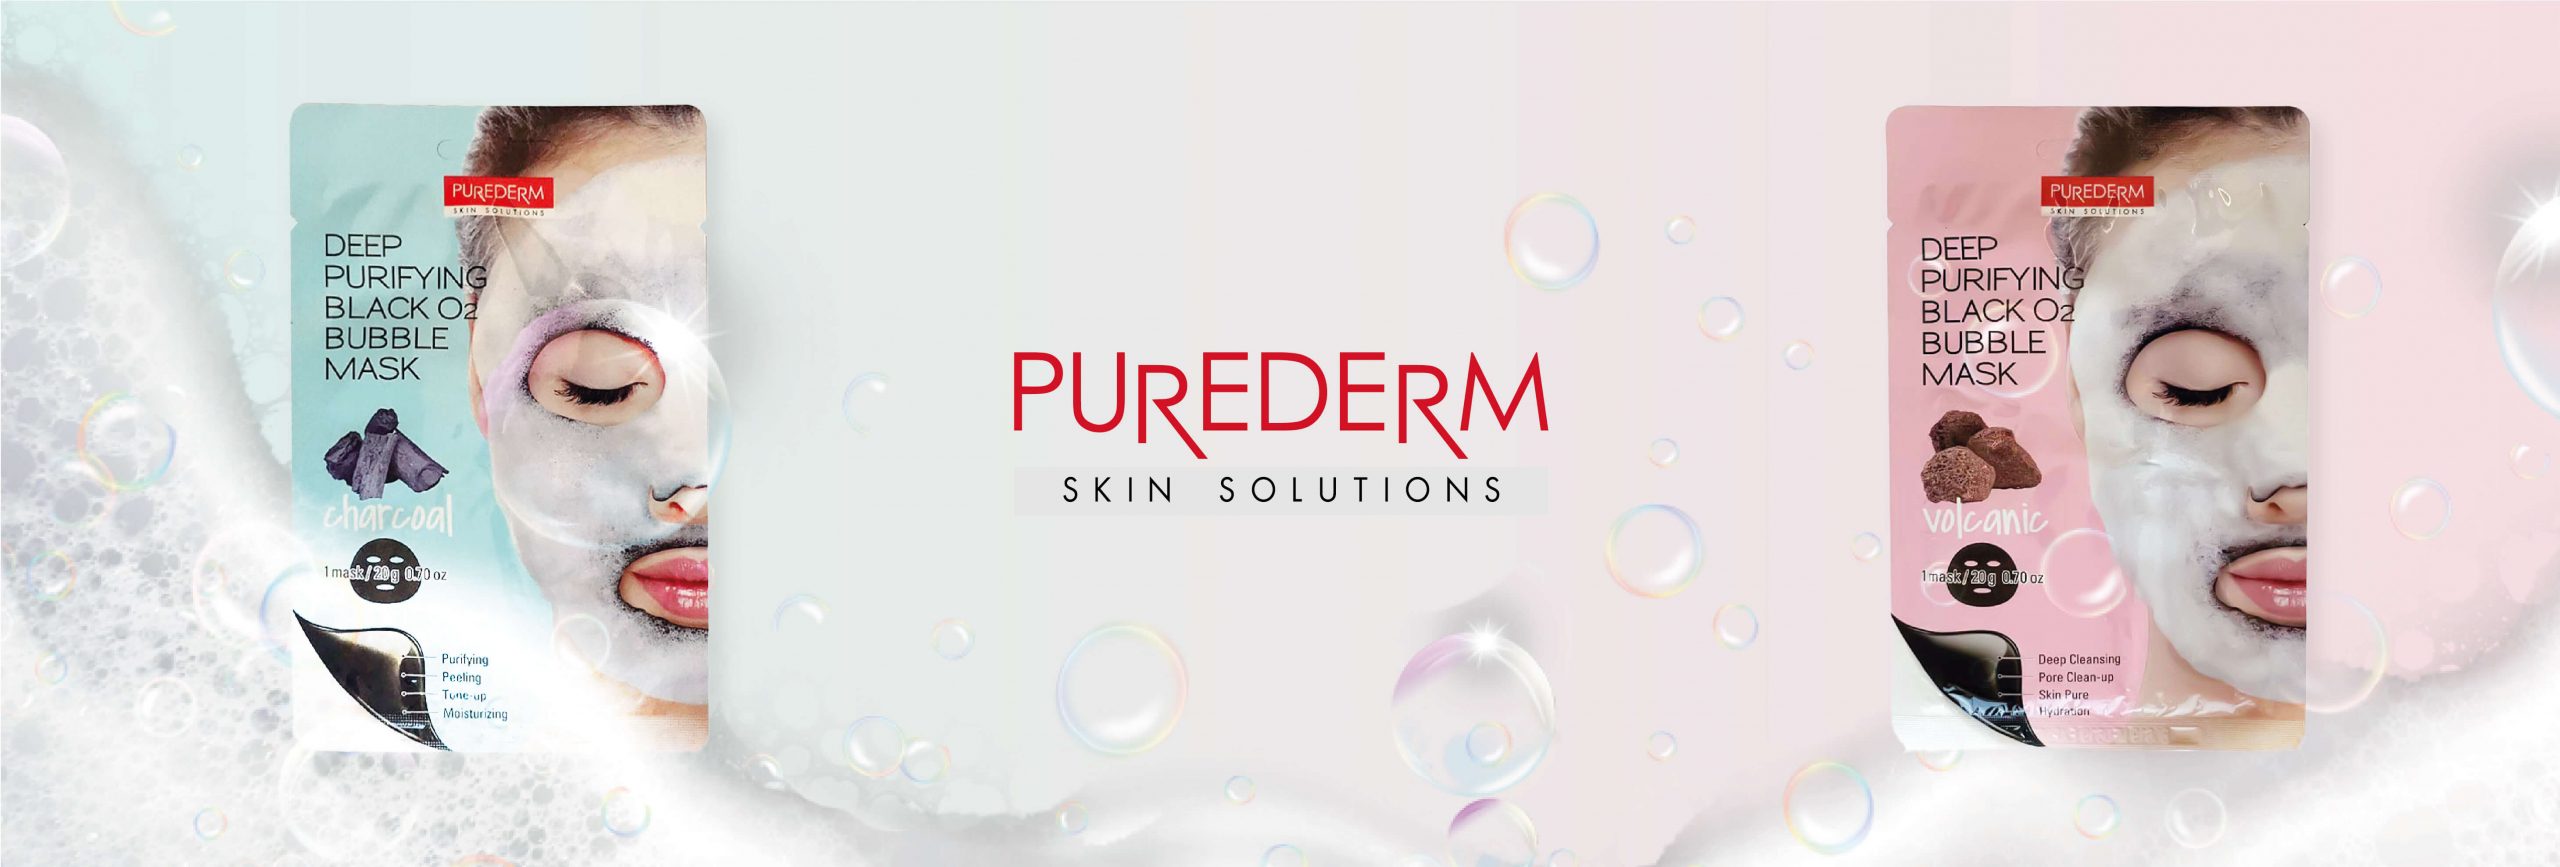 Purederm Bubble Cleansing sheet mask